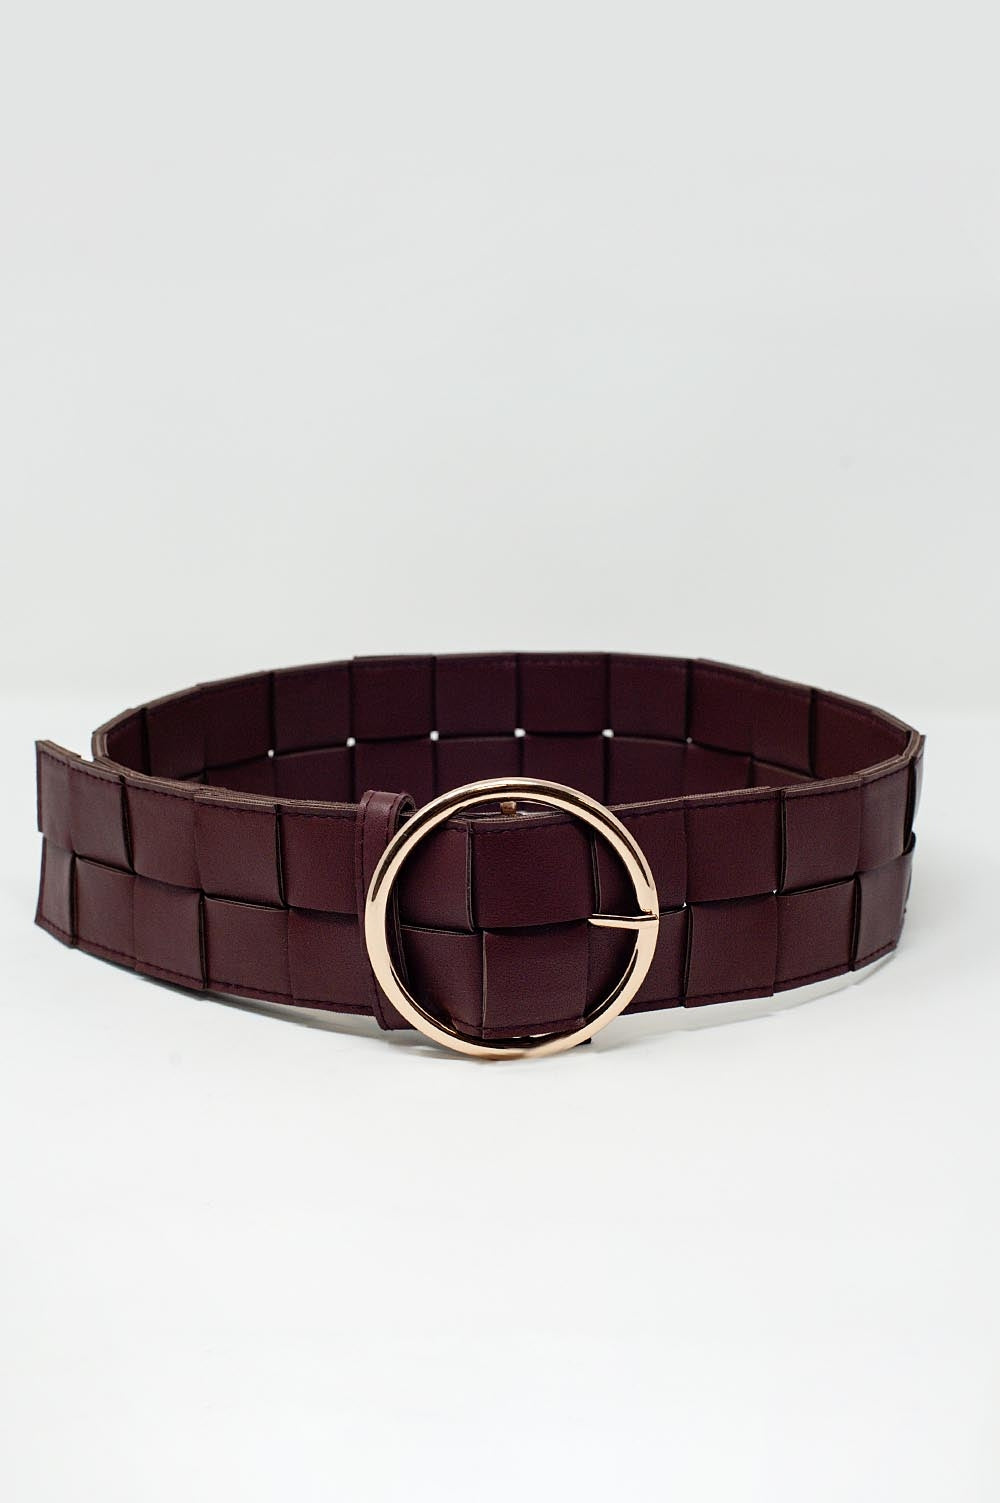 Q2 Belt with gold buckle in maroon